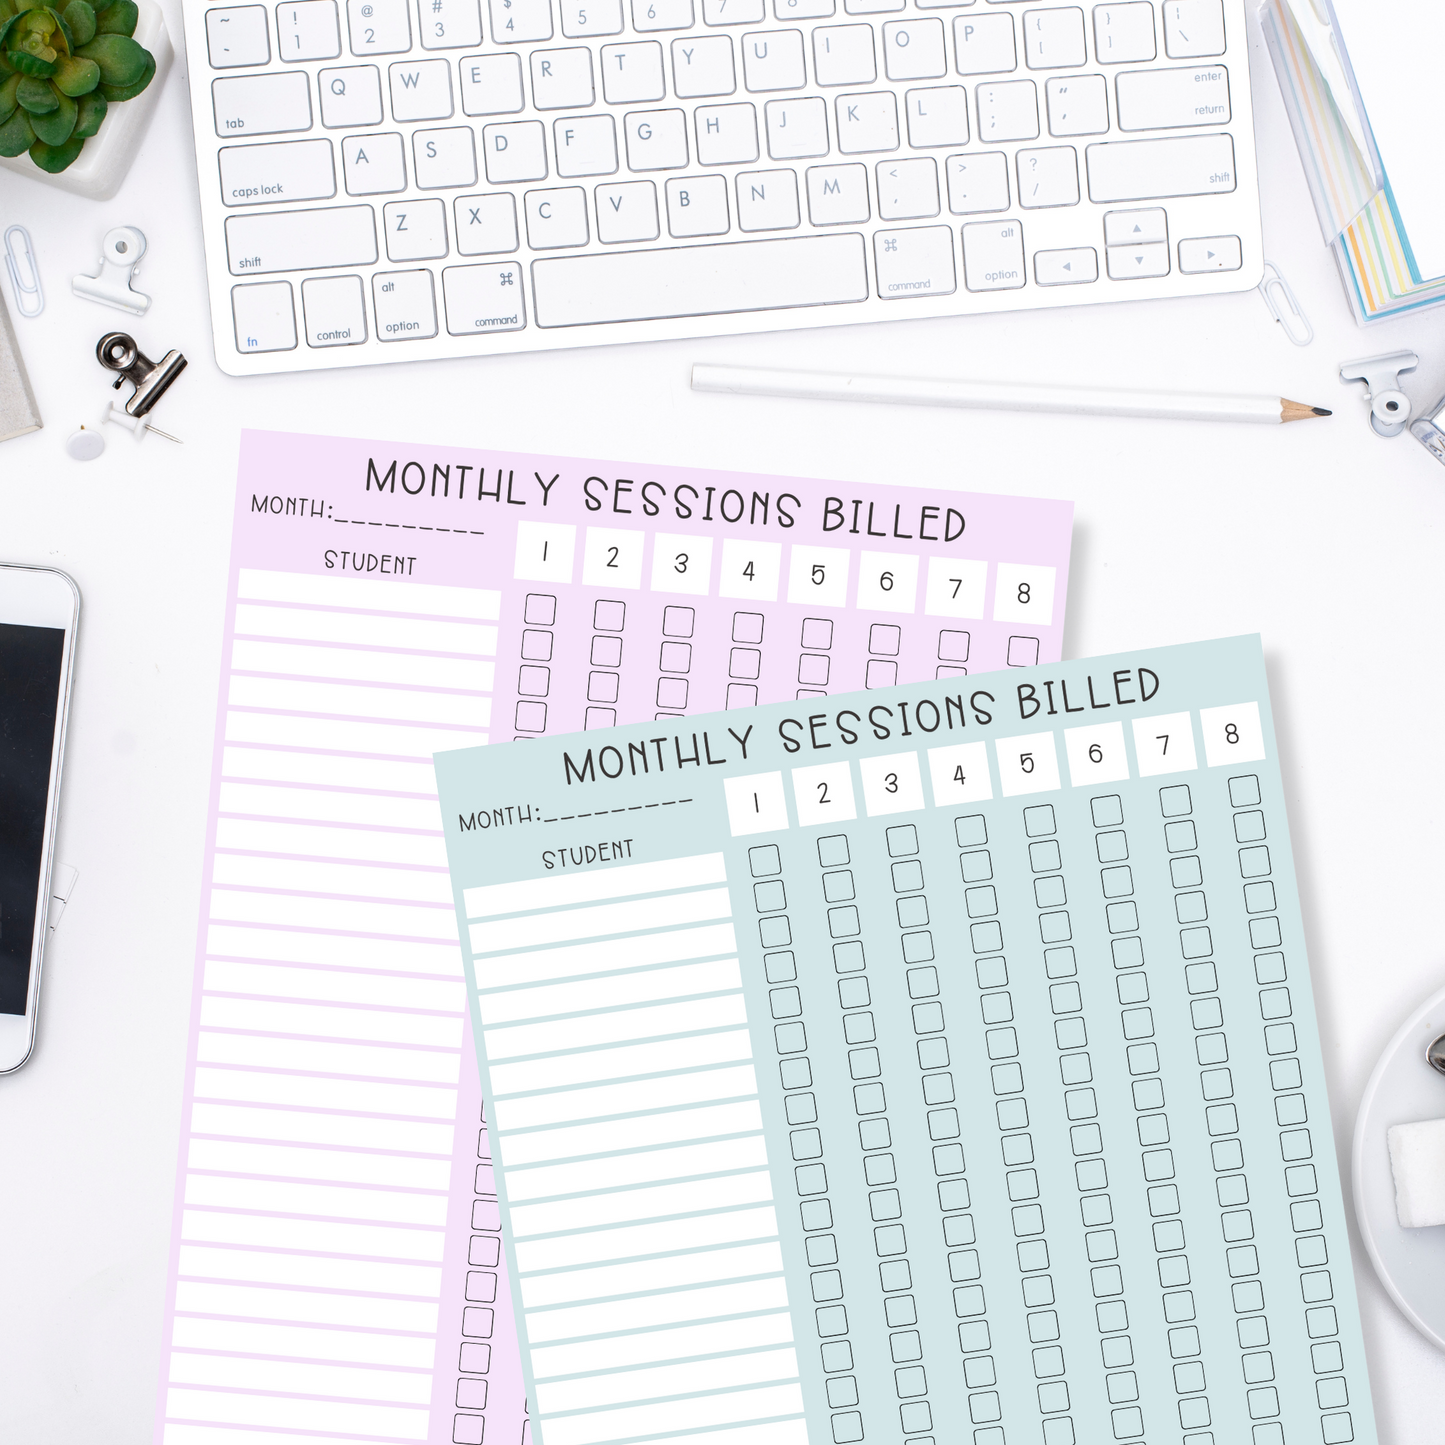 Monthly Billing Checklist Notepads (8.5 x 11)